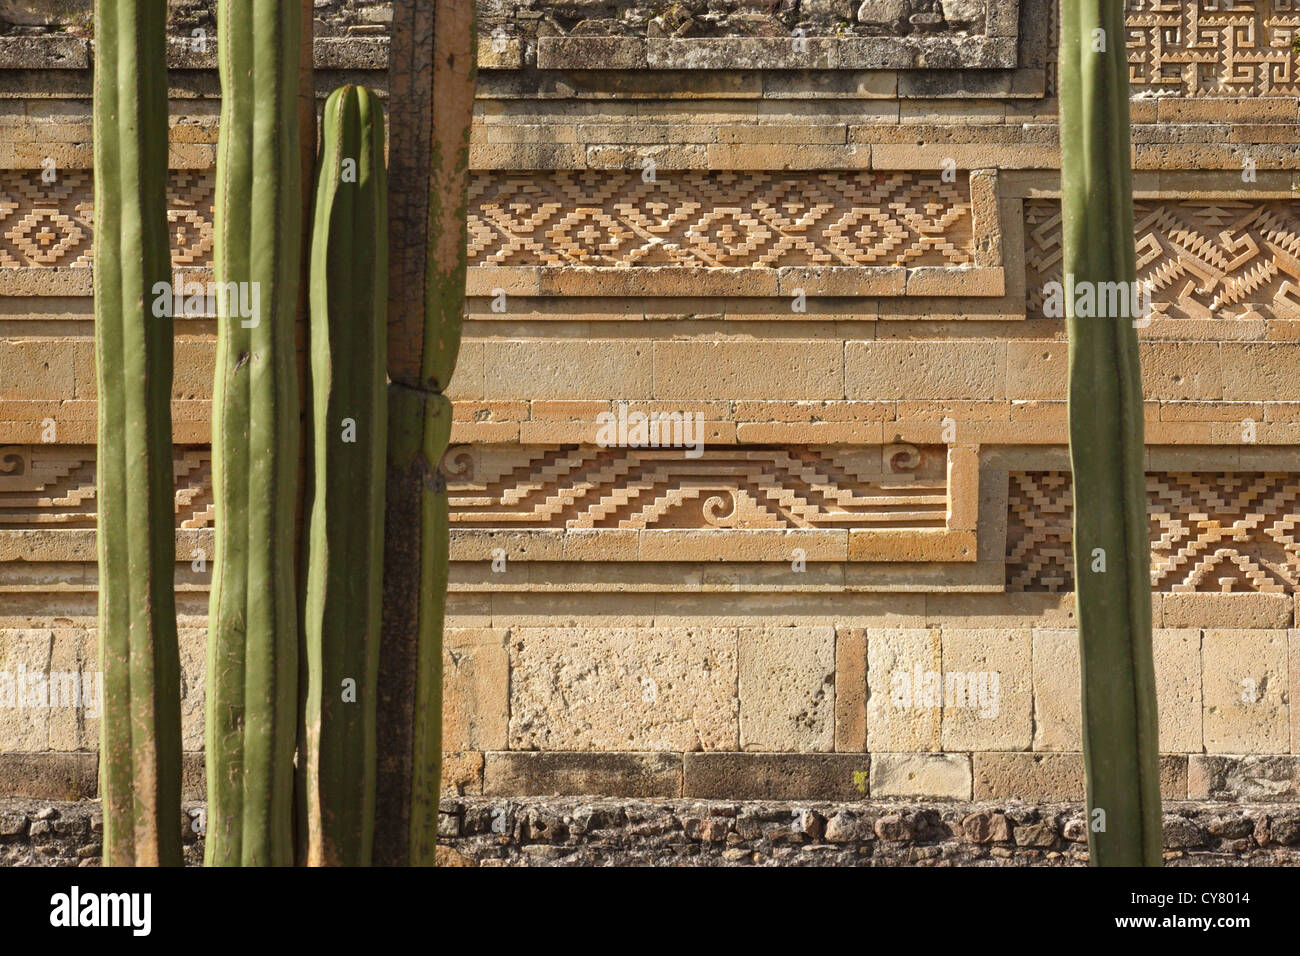 Cactus frame an ancient, decorated wall at the Mitla, Oaxaca archaeology site in Mexico. Stock Photo